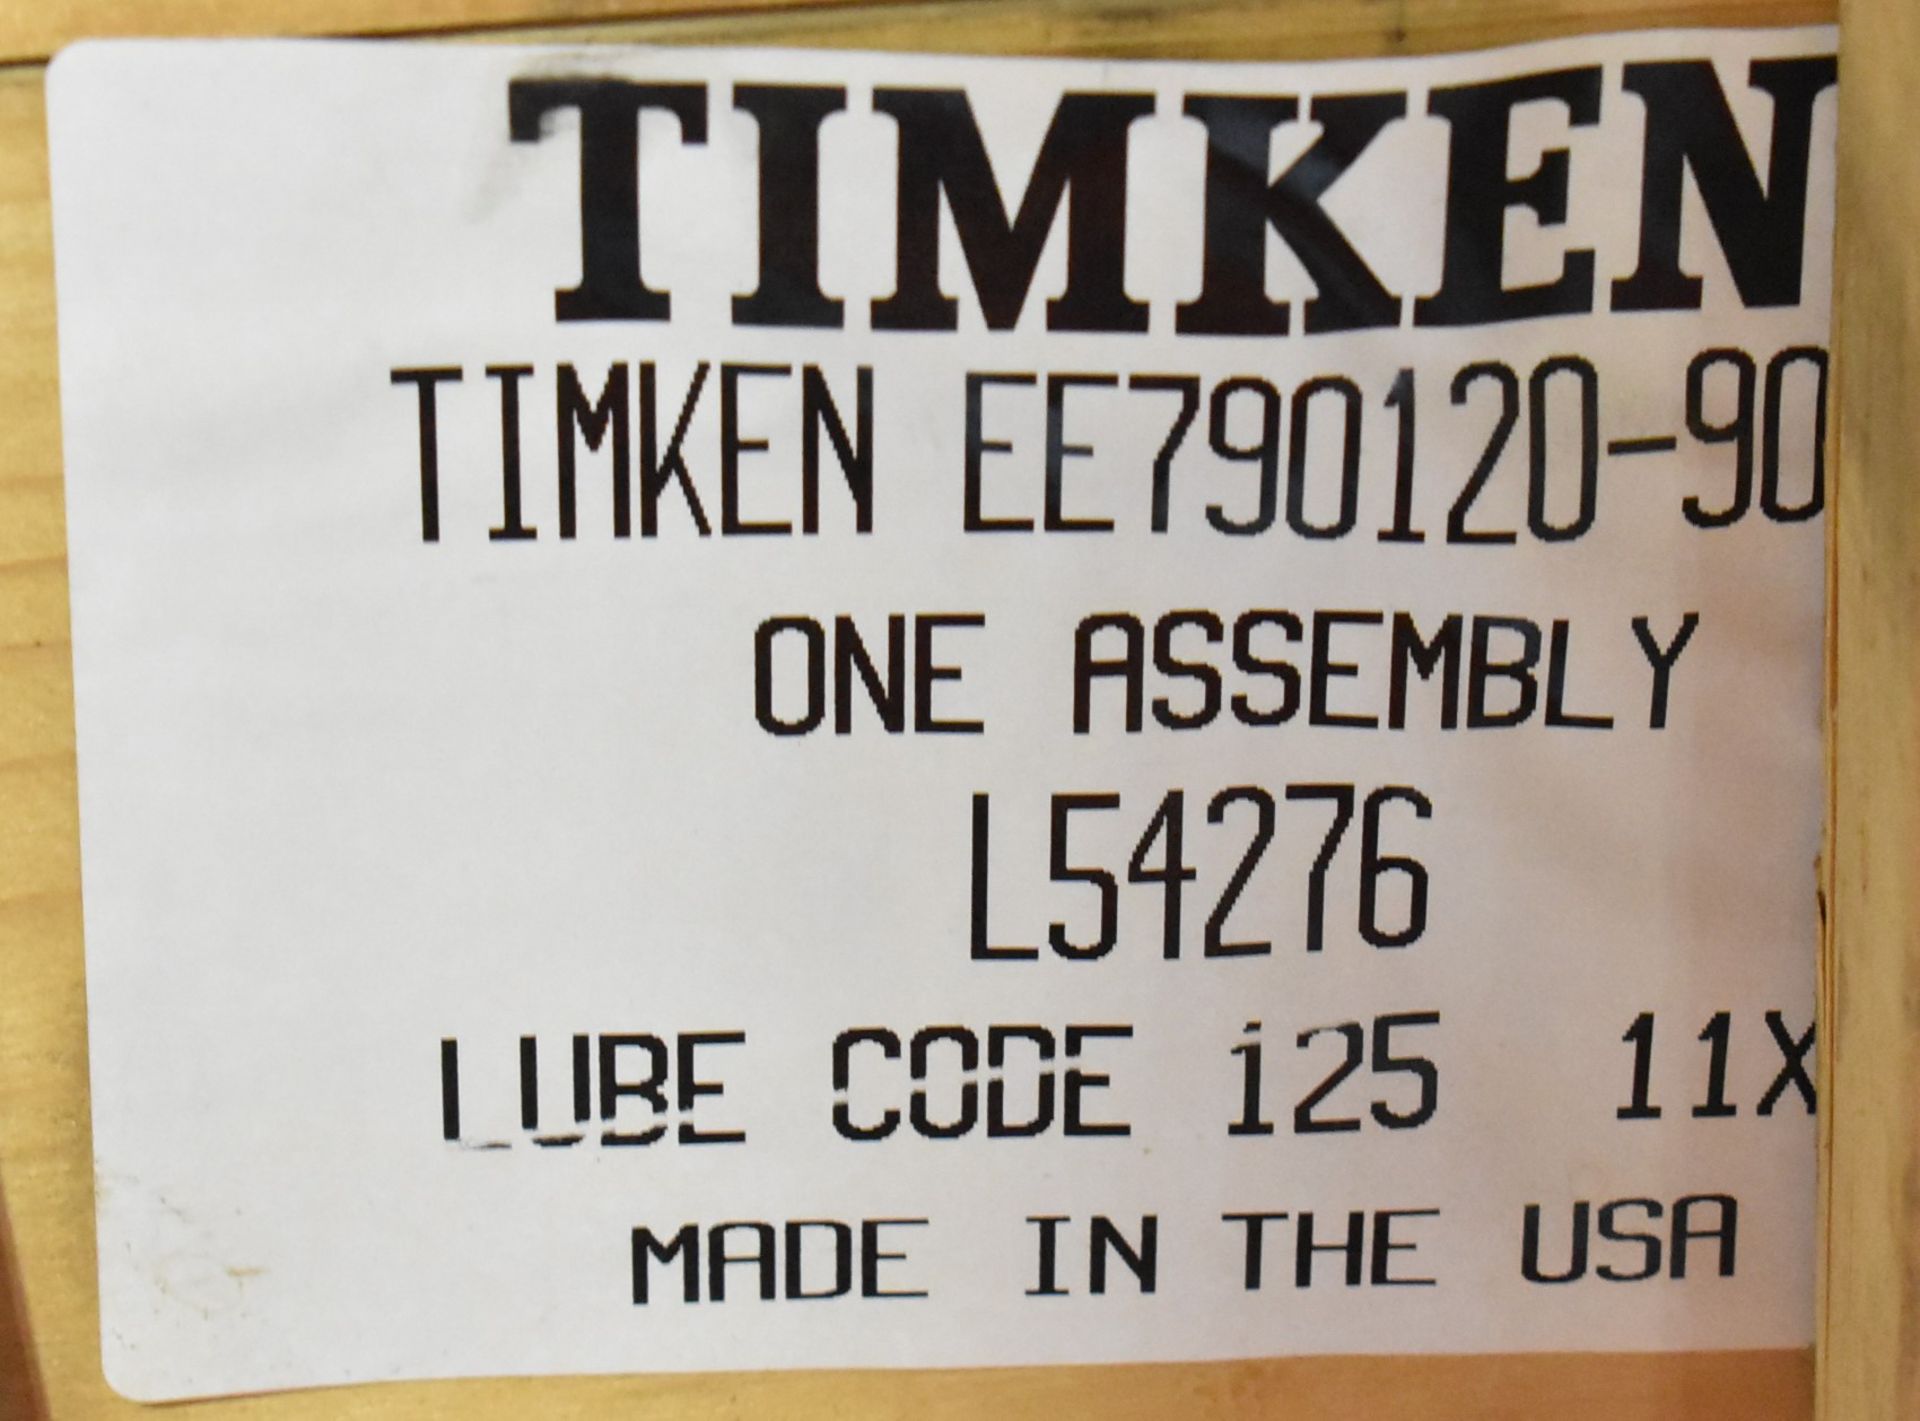 LOT/ TIMKEN EE790120-90 TAPERED ROLLER BEARING & STEEL PLATE WITH TAPERED BORE (CMD-299-23S) - Image 5 of 6